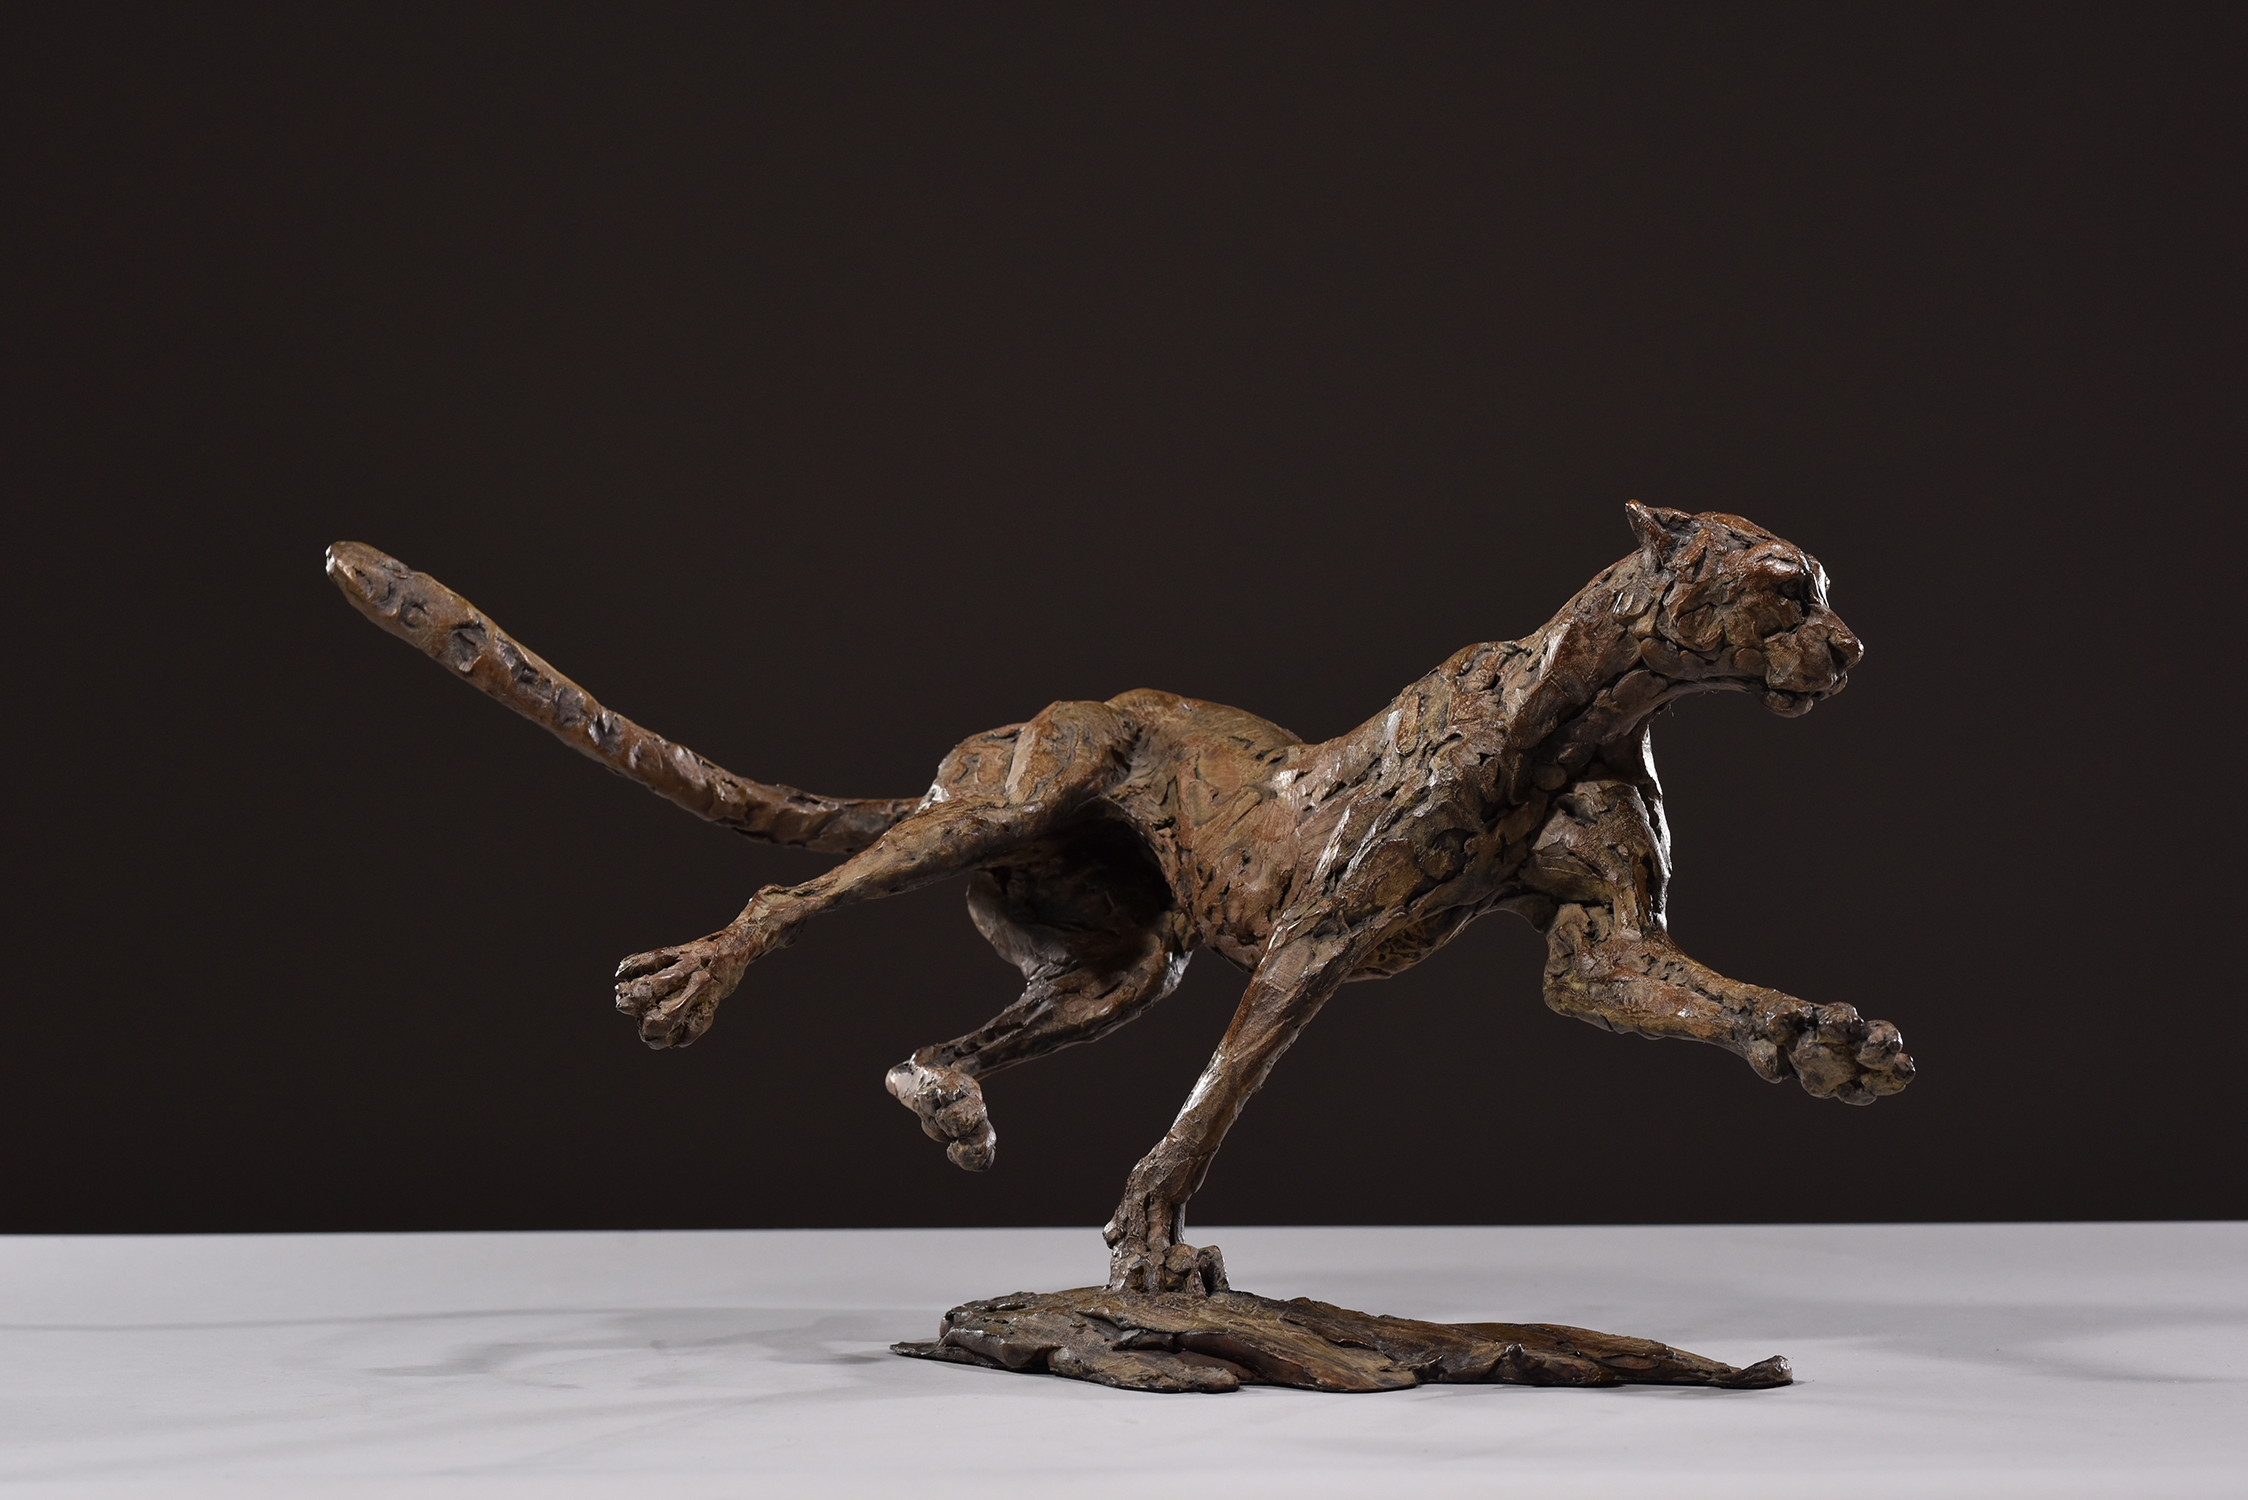 Cheetah sculpture I made What do you think ? : r/Animals